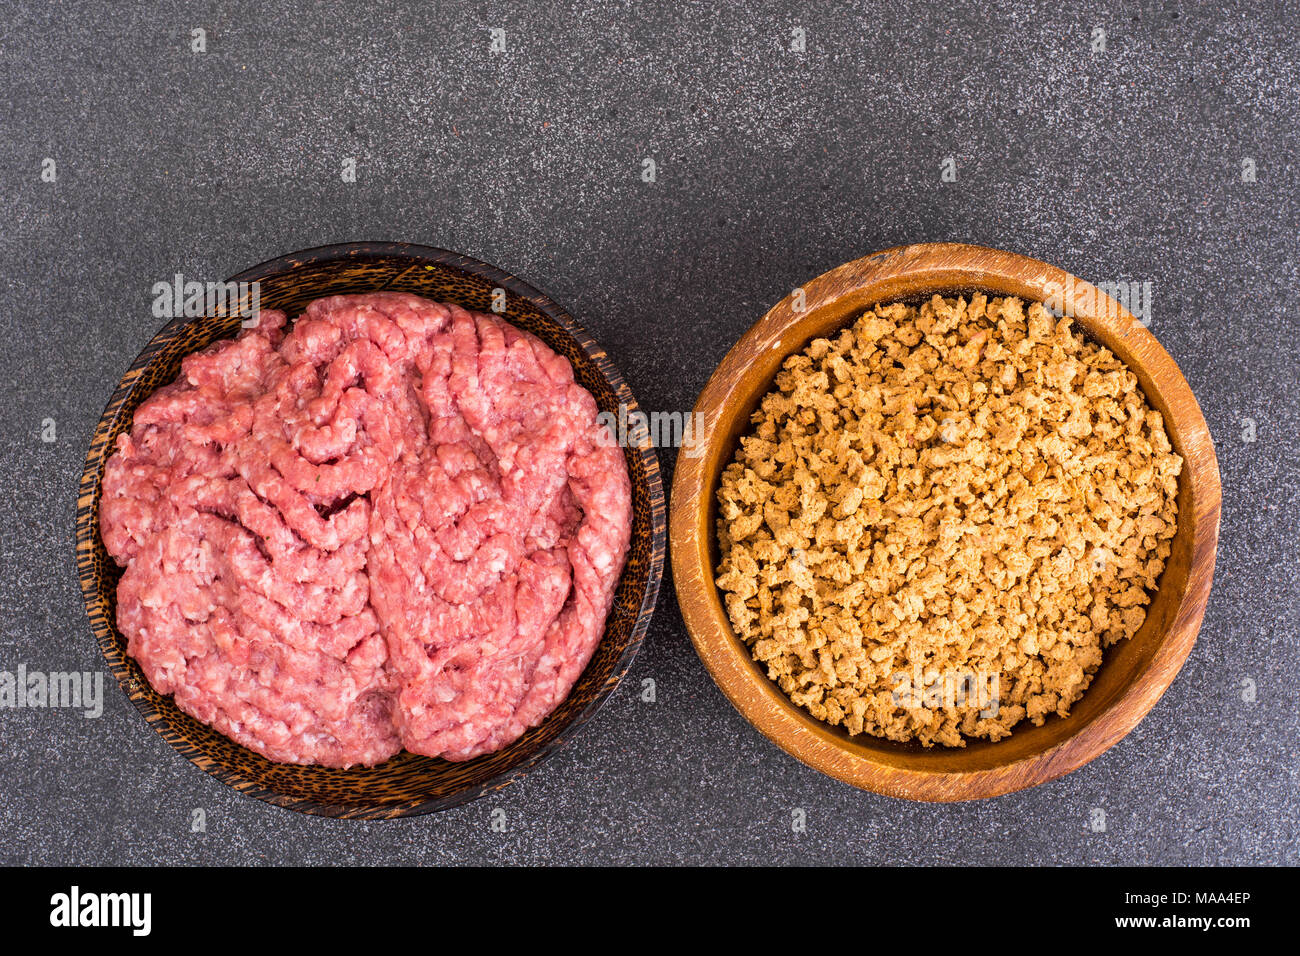 Minced meat soy and beef. Studio Photo Stock Photo